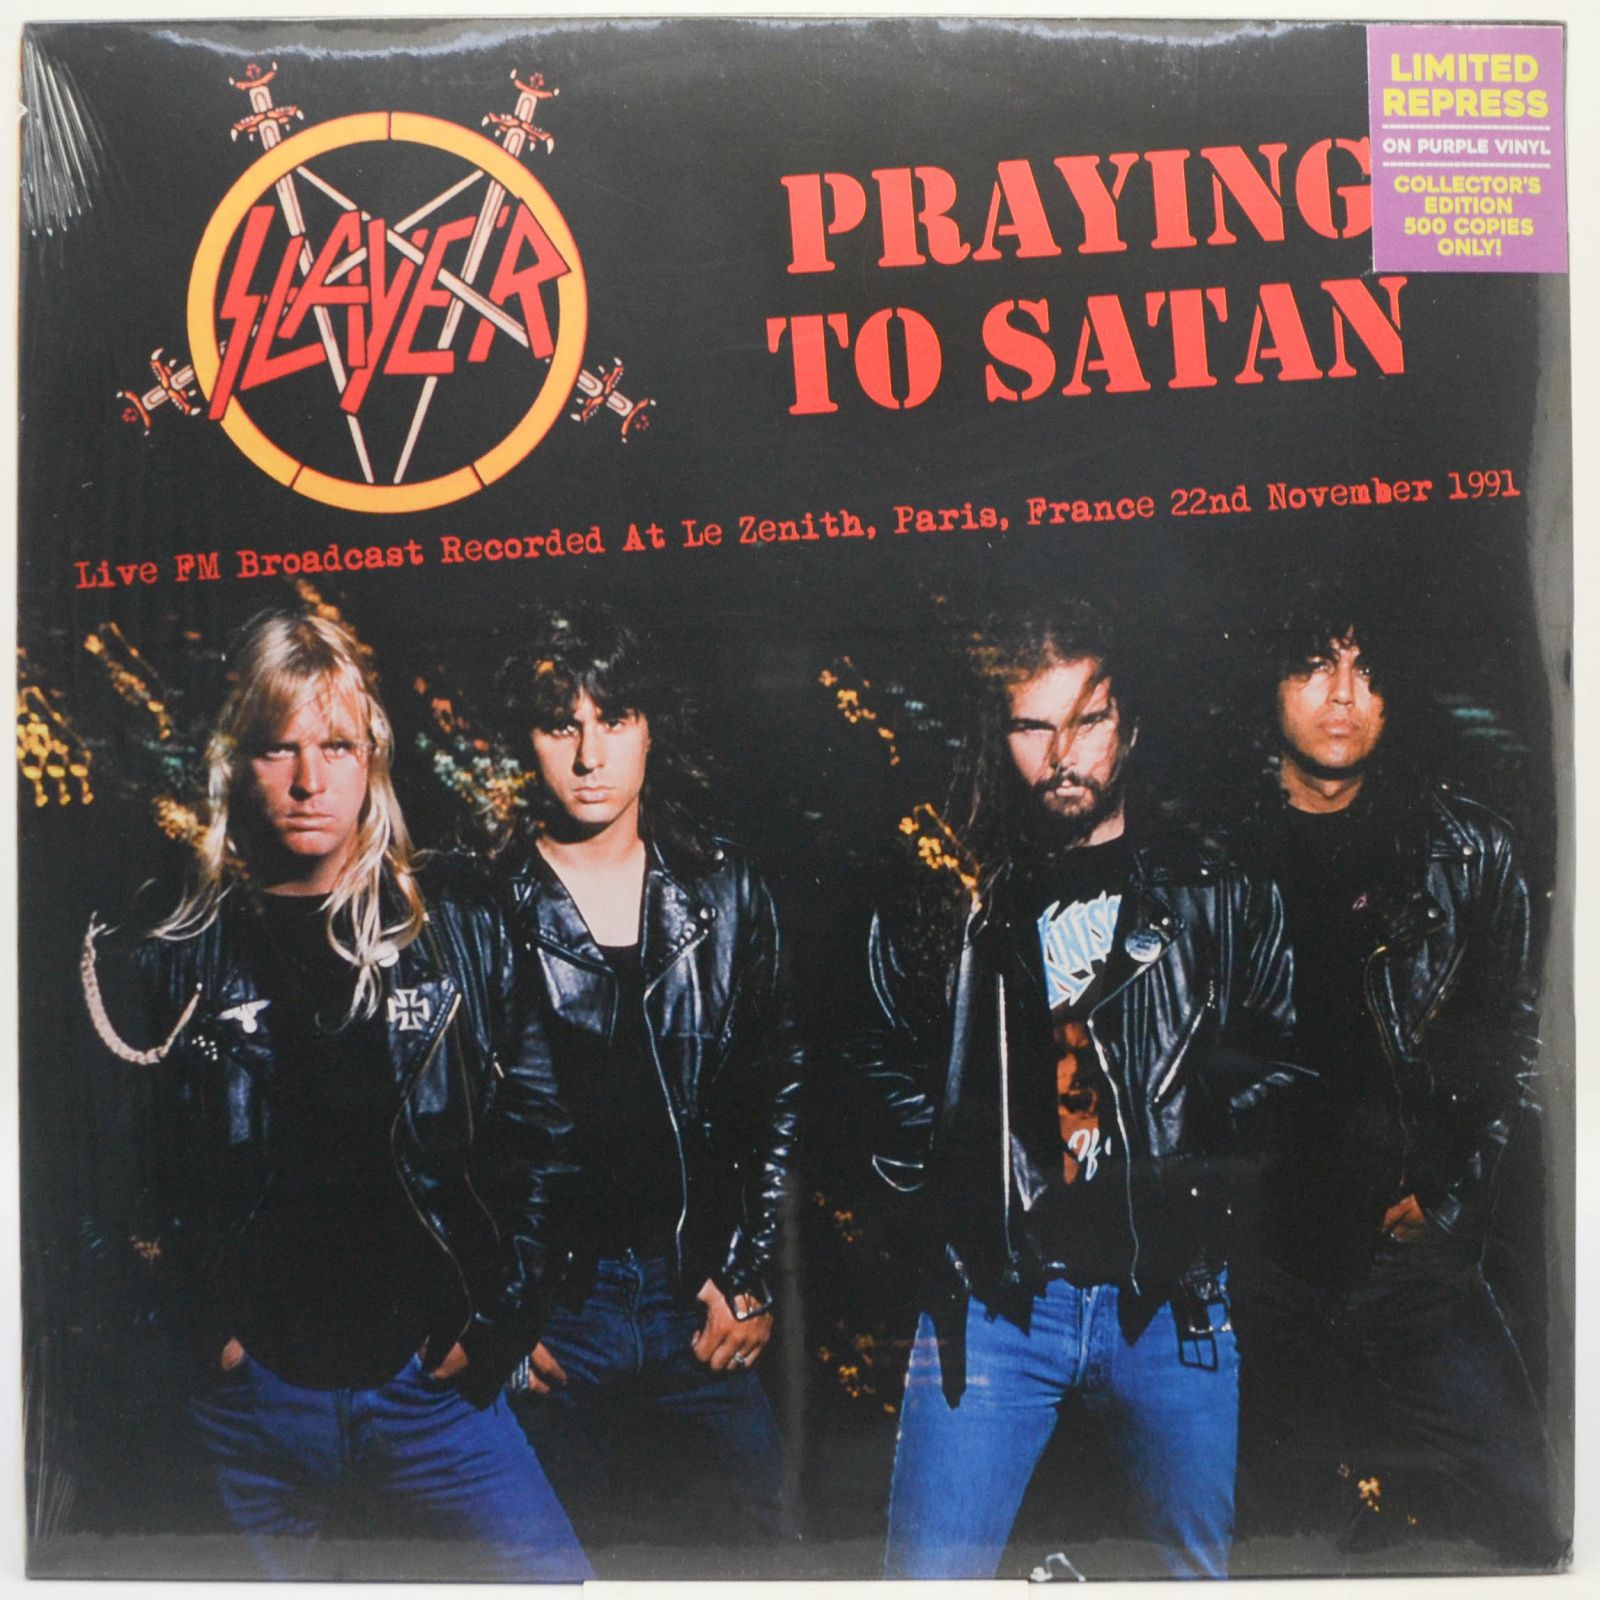 Praying To Satan: Live FM Broadcast Recorded At Le Zenith, Paris, France 22nd November 1991, 2018